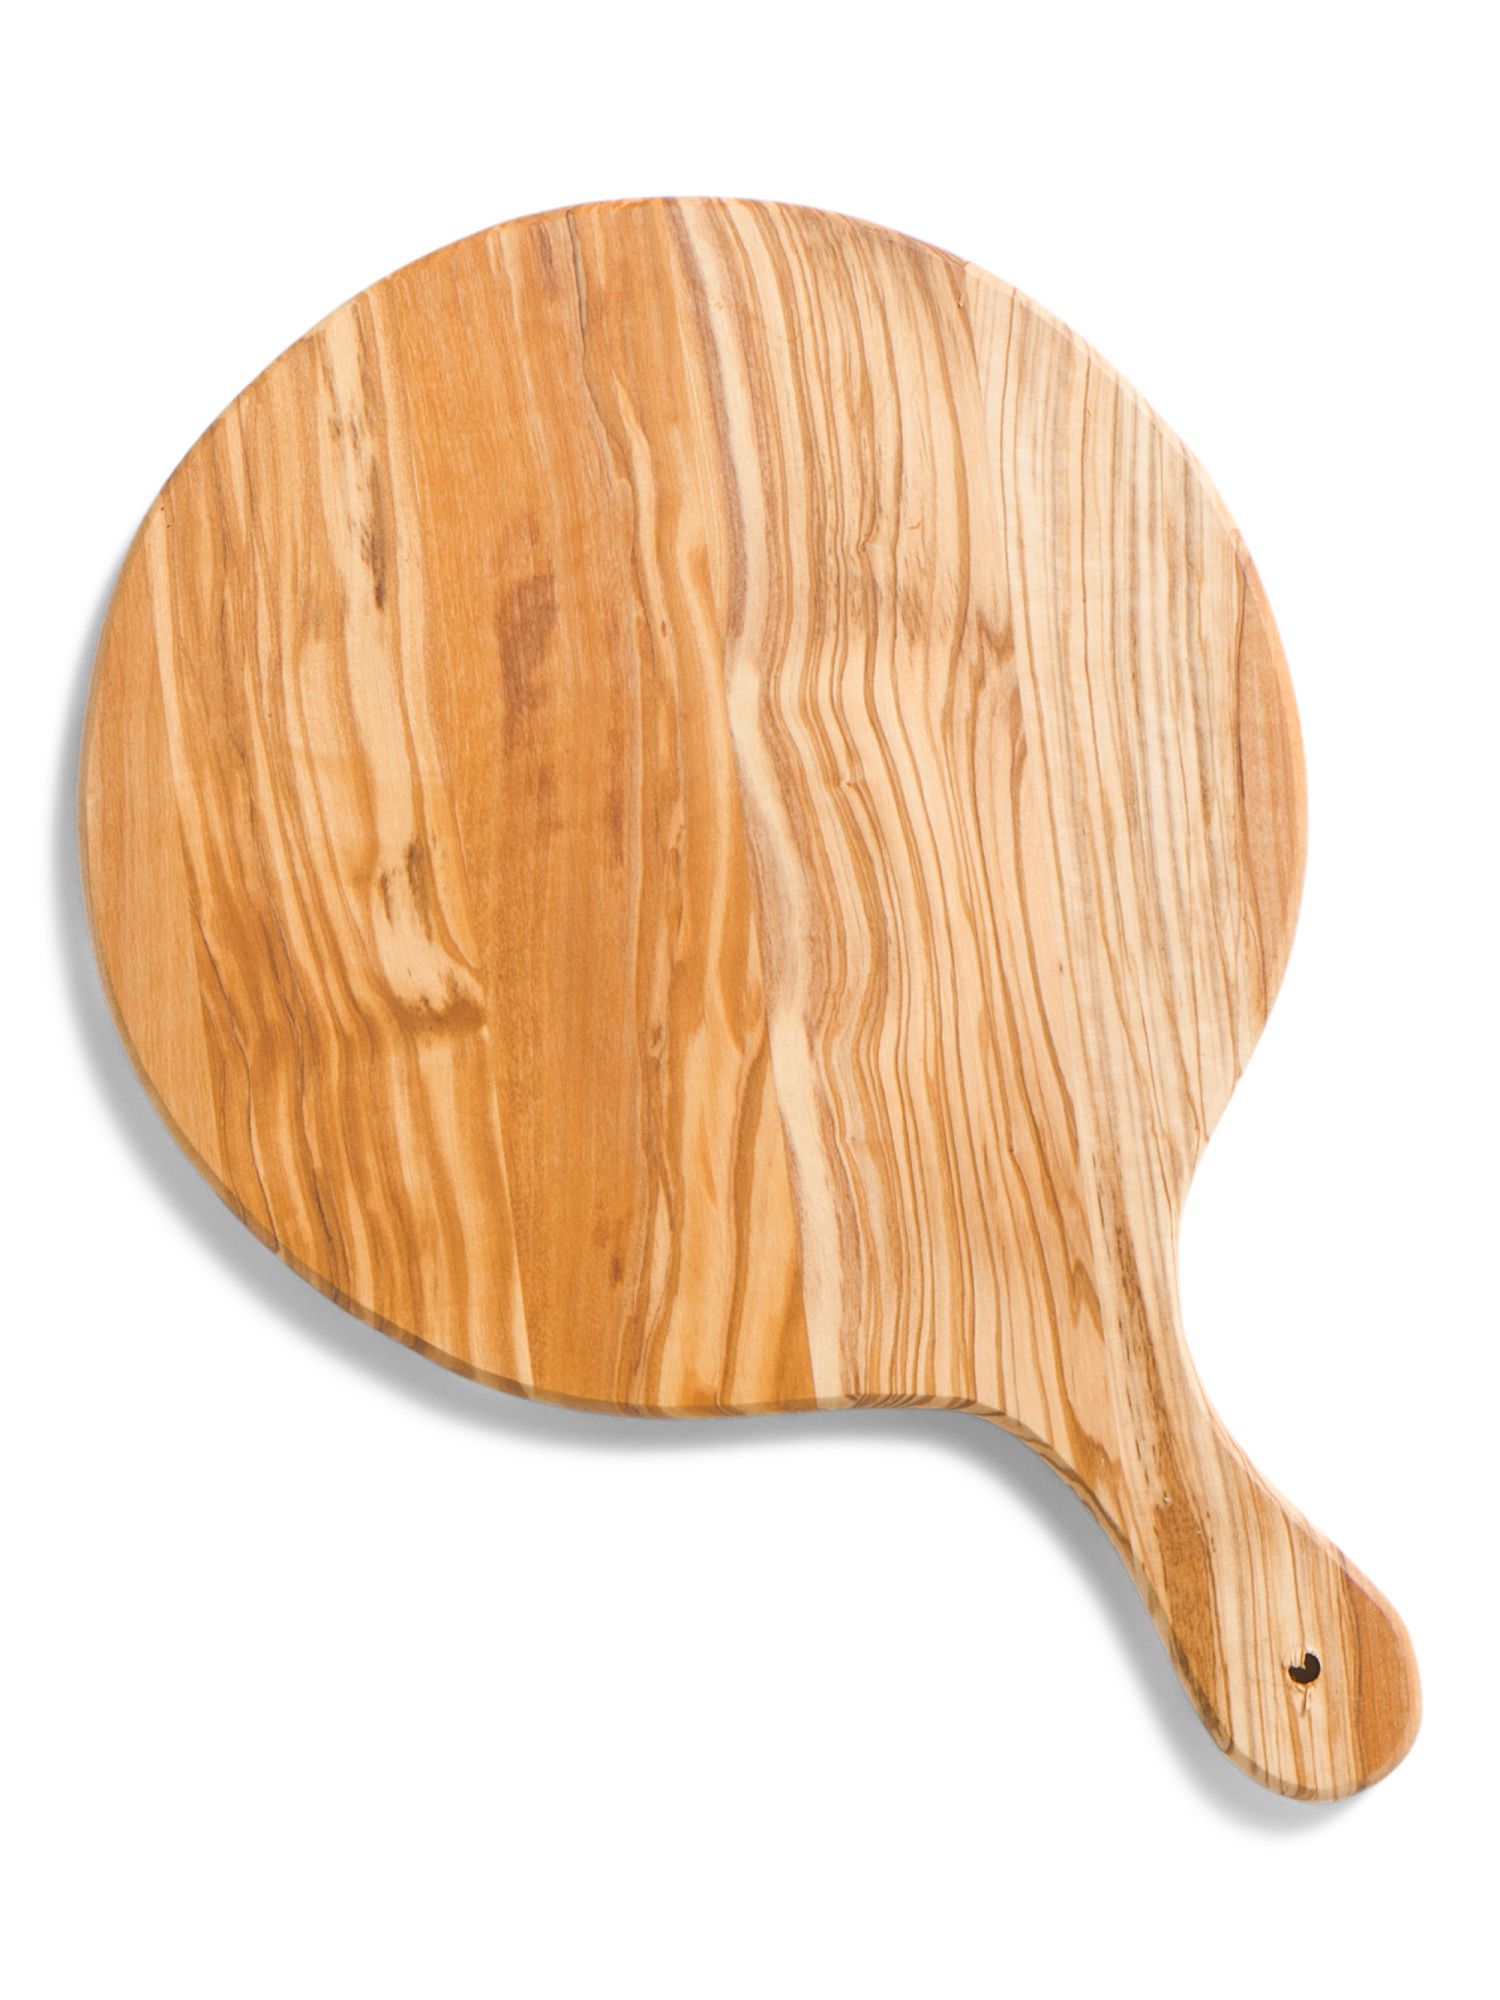 Made In Italy 15in Round Olive Wood Cutting Board | TJ Maxx